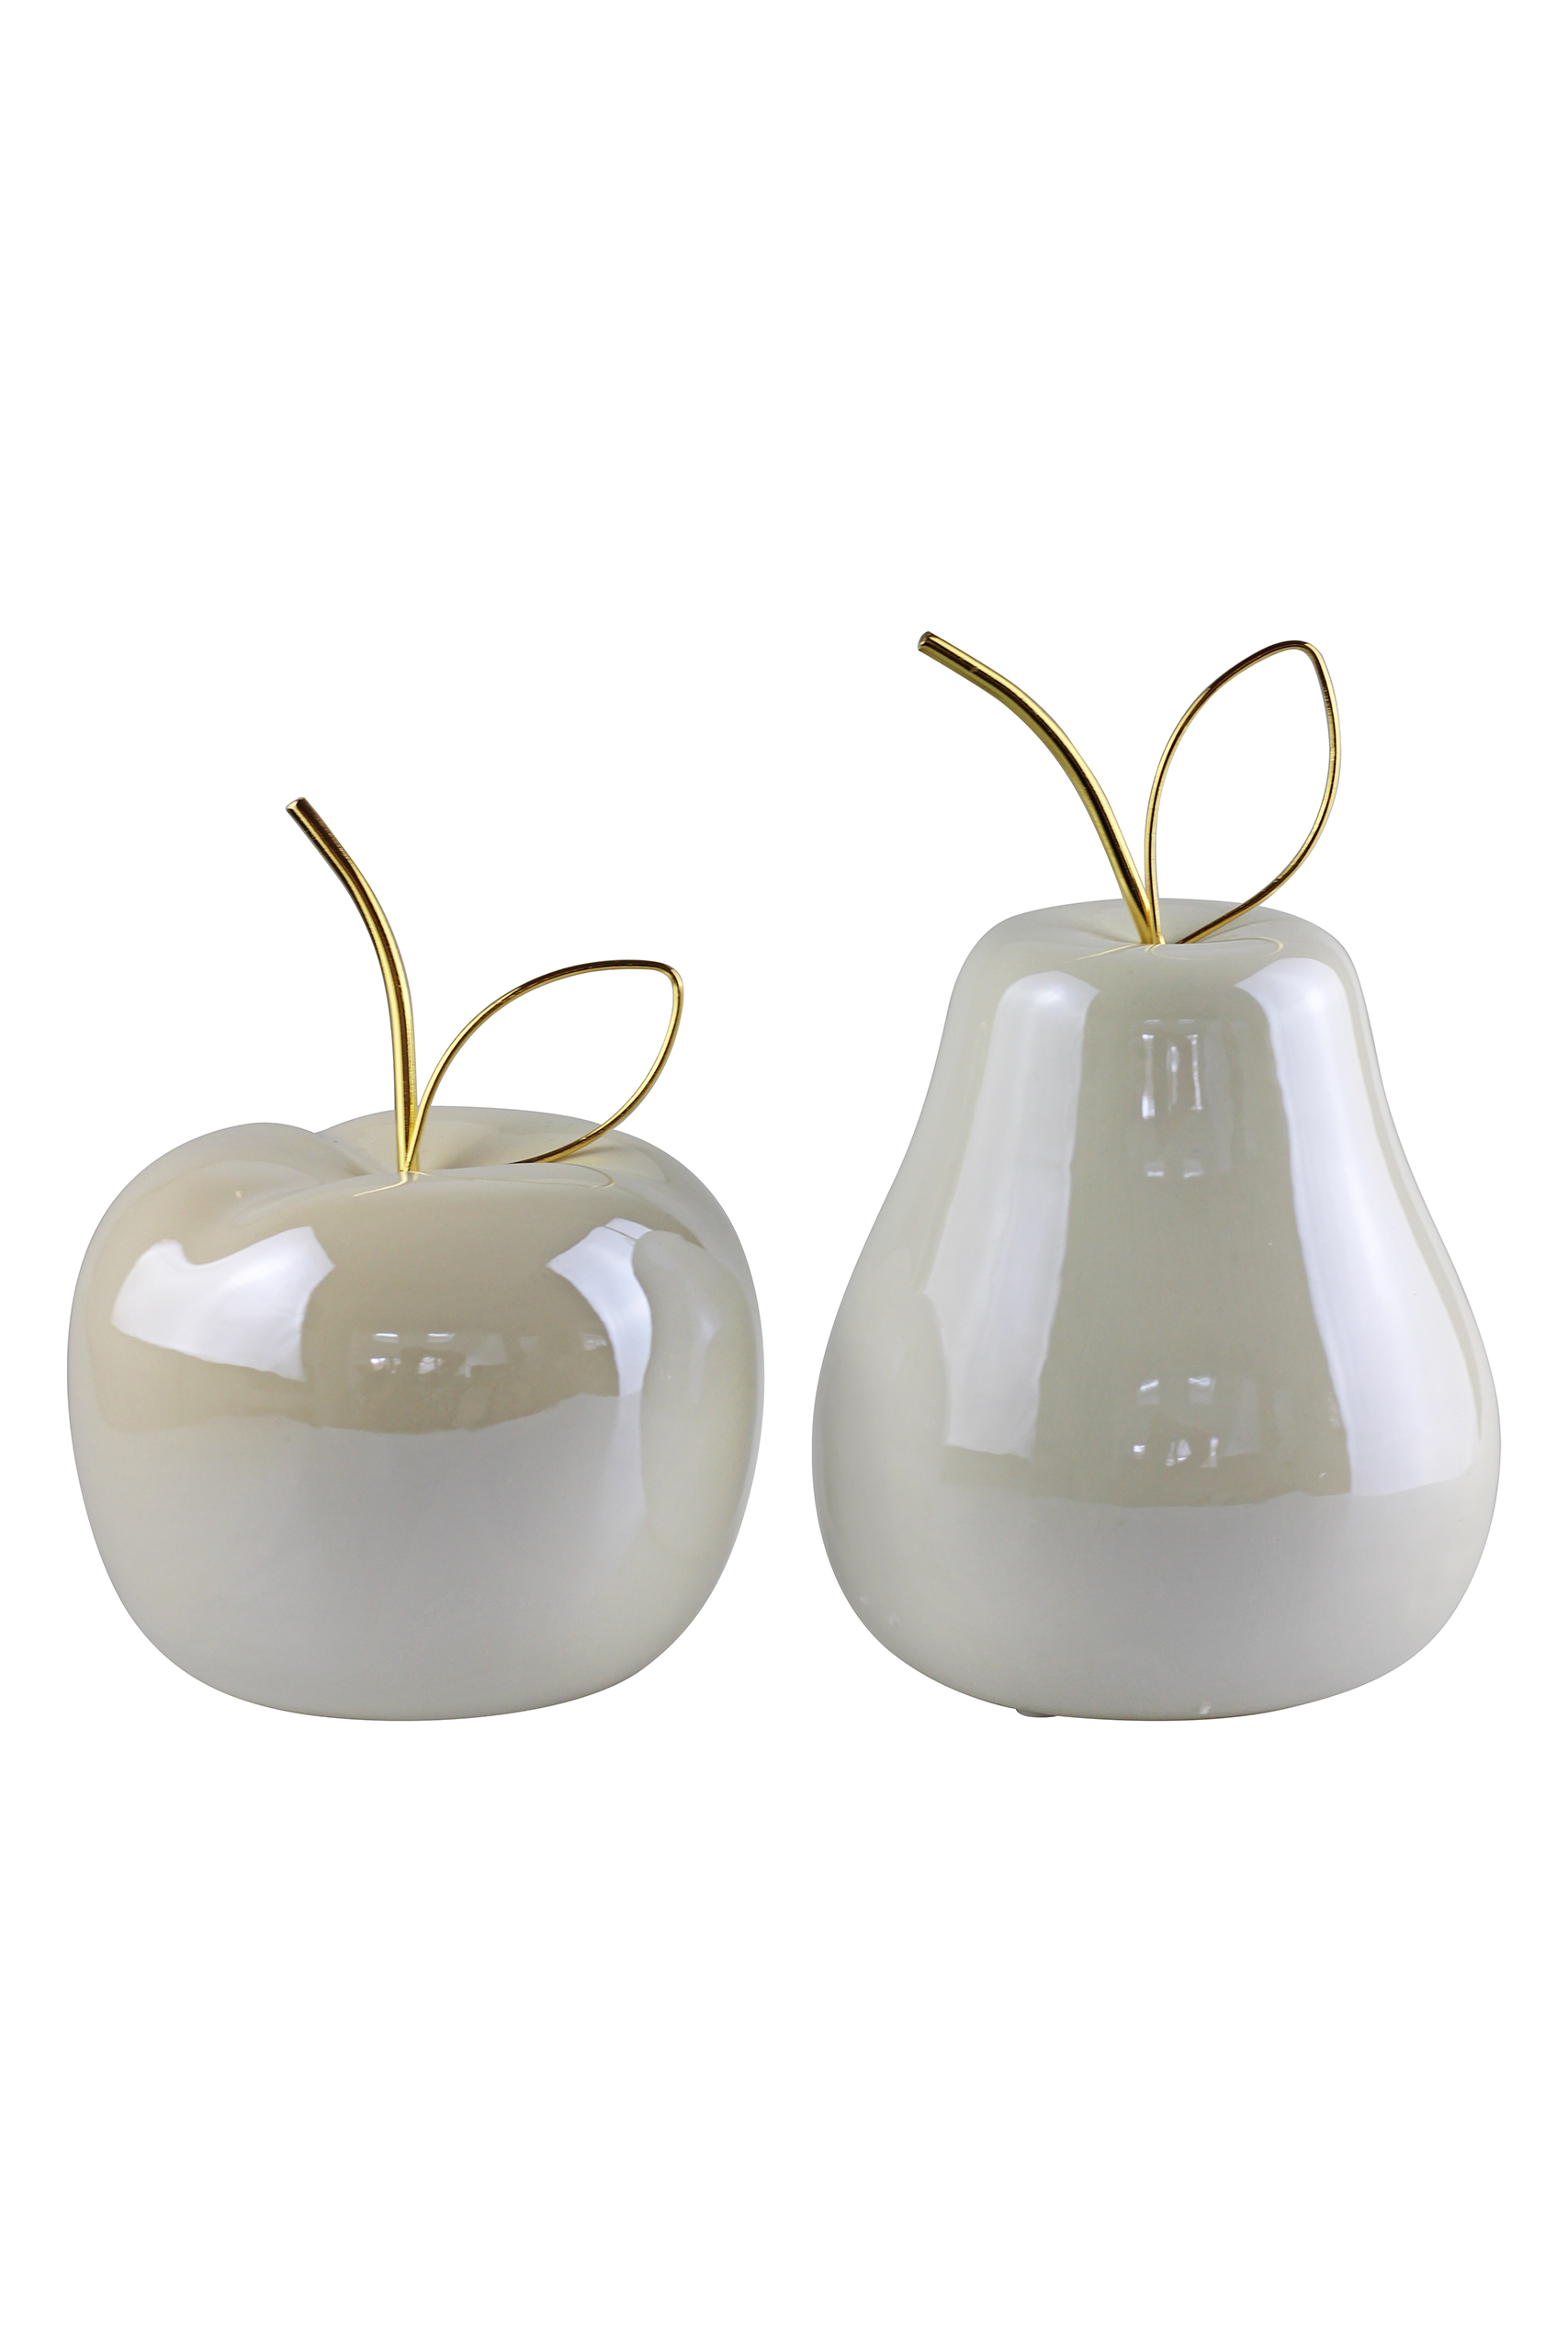 Large Gold Pearlescent Apple & Pear Set | Pretty Little Home